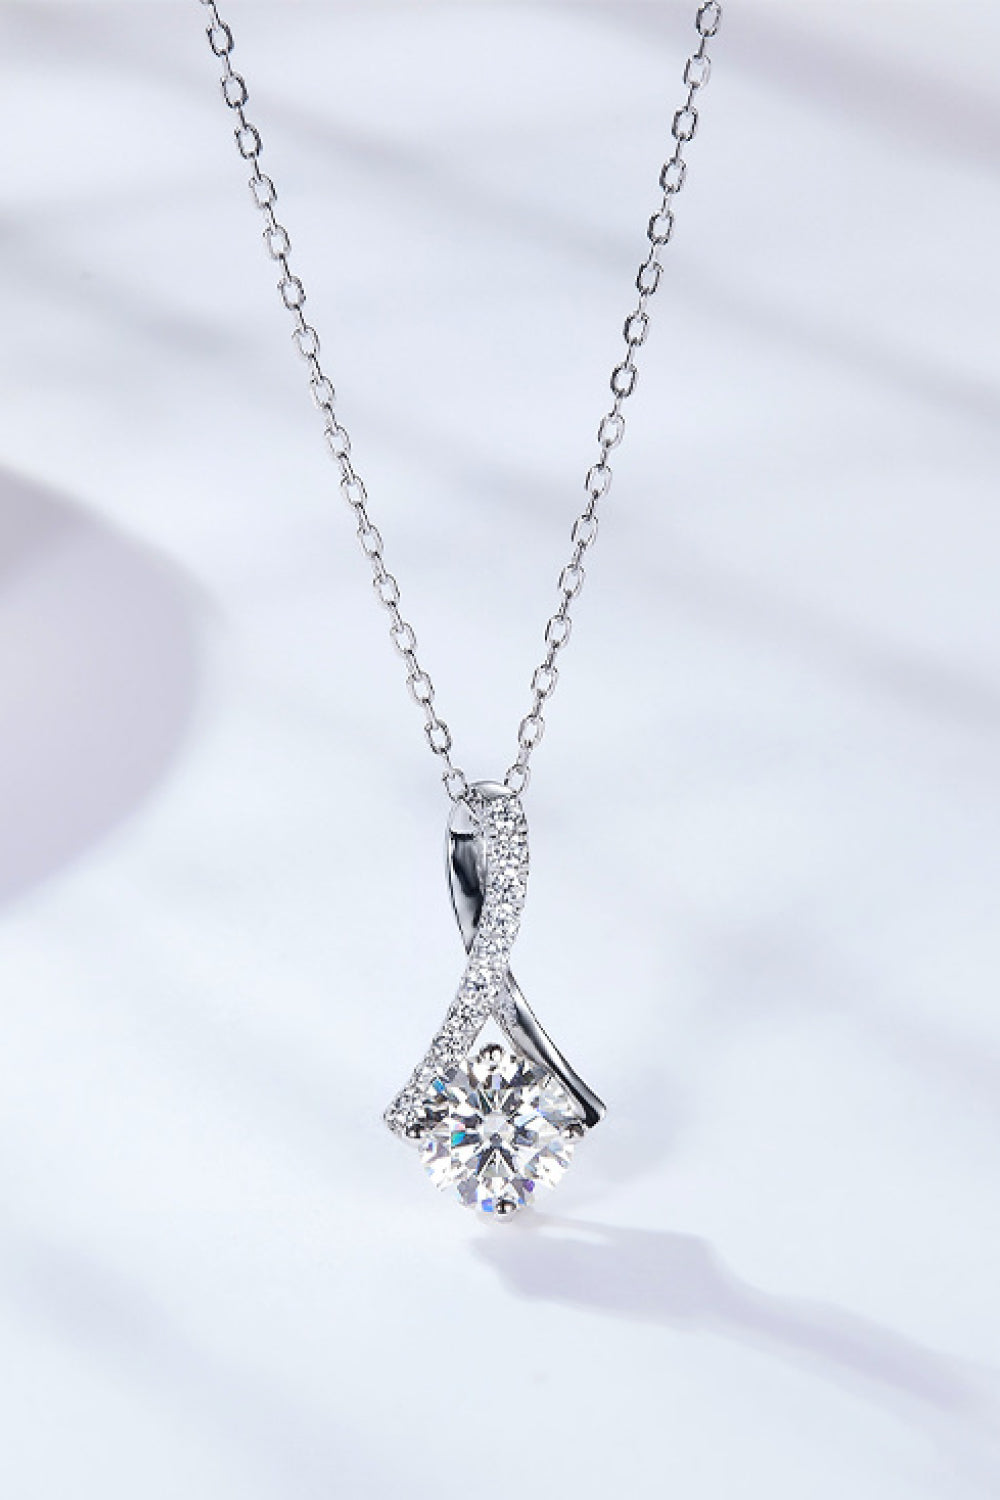 Special Occasion 1 Carat Moissanite Pendant Necklace (Platinum-Plated Fine Silver)